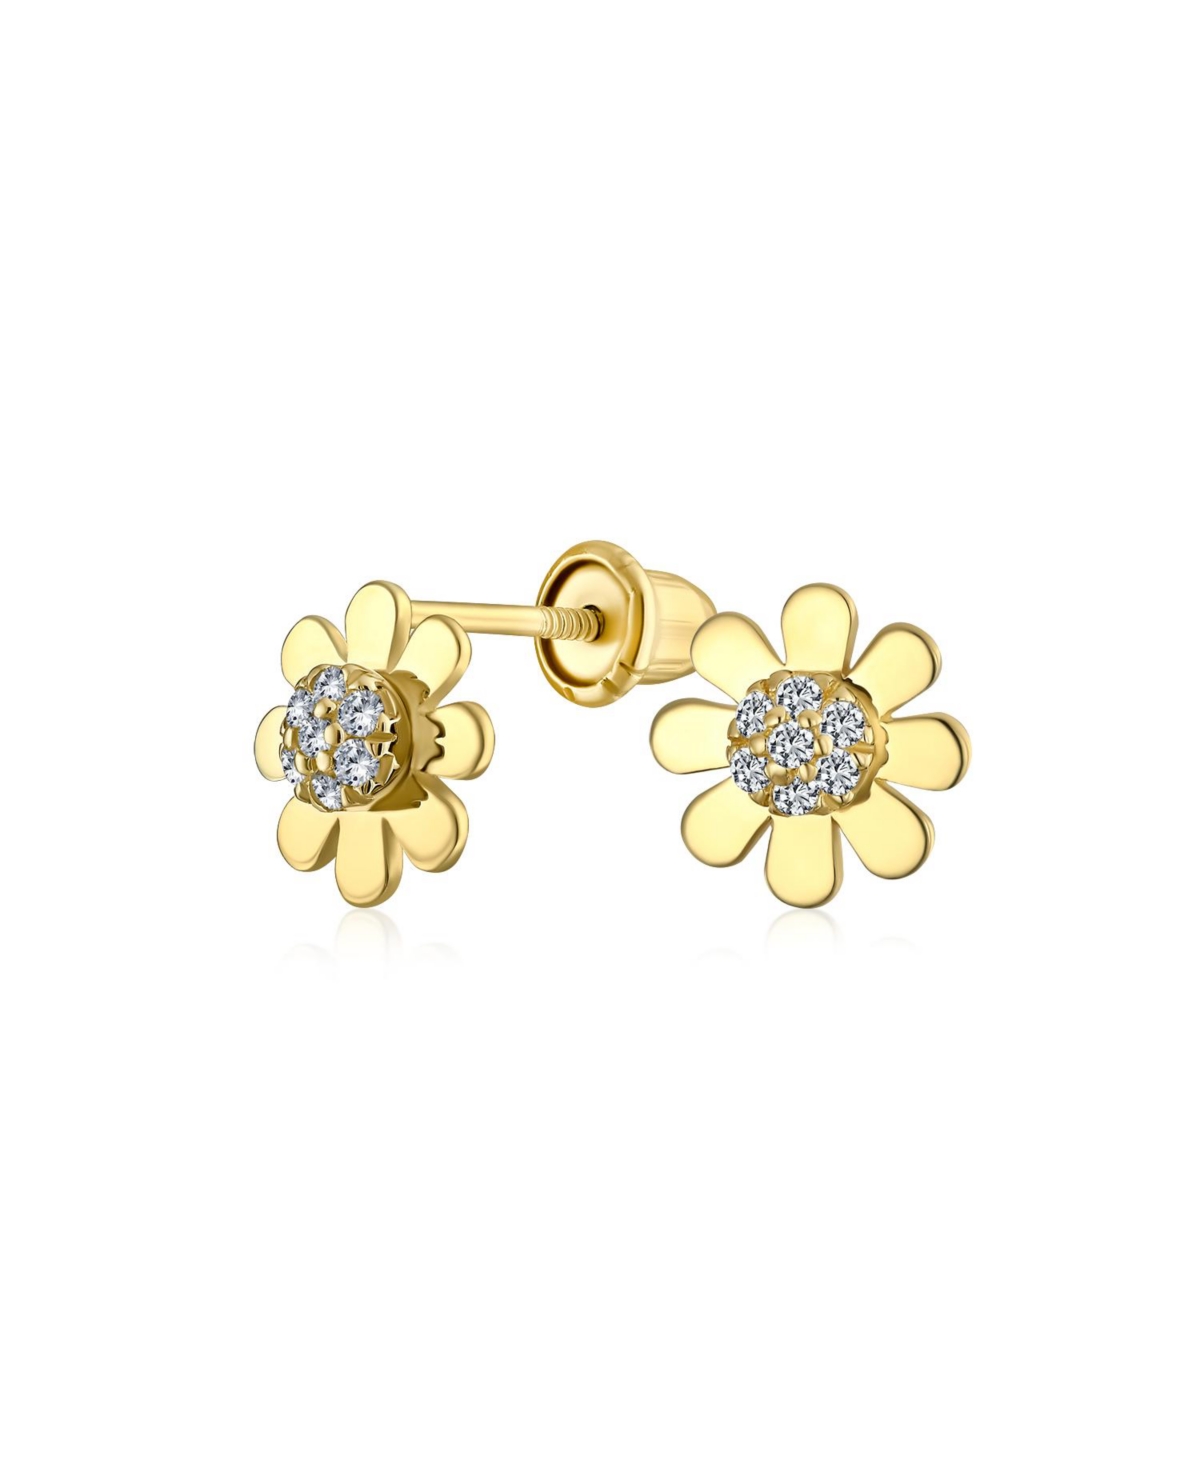 Tiny Petite Cz Cubic Zirconia Accent Dainty Real 14K Yellow Gold Sunflower Daisy Flower Stud Earrings For Women Teen Secure Clutch Screw back - Gold